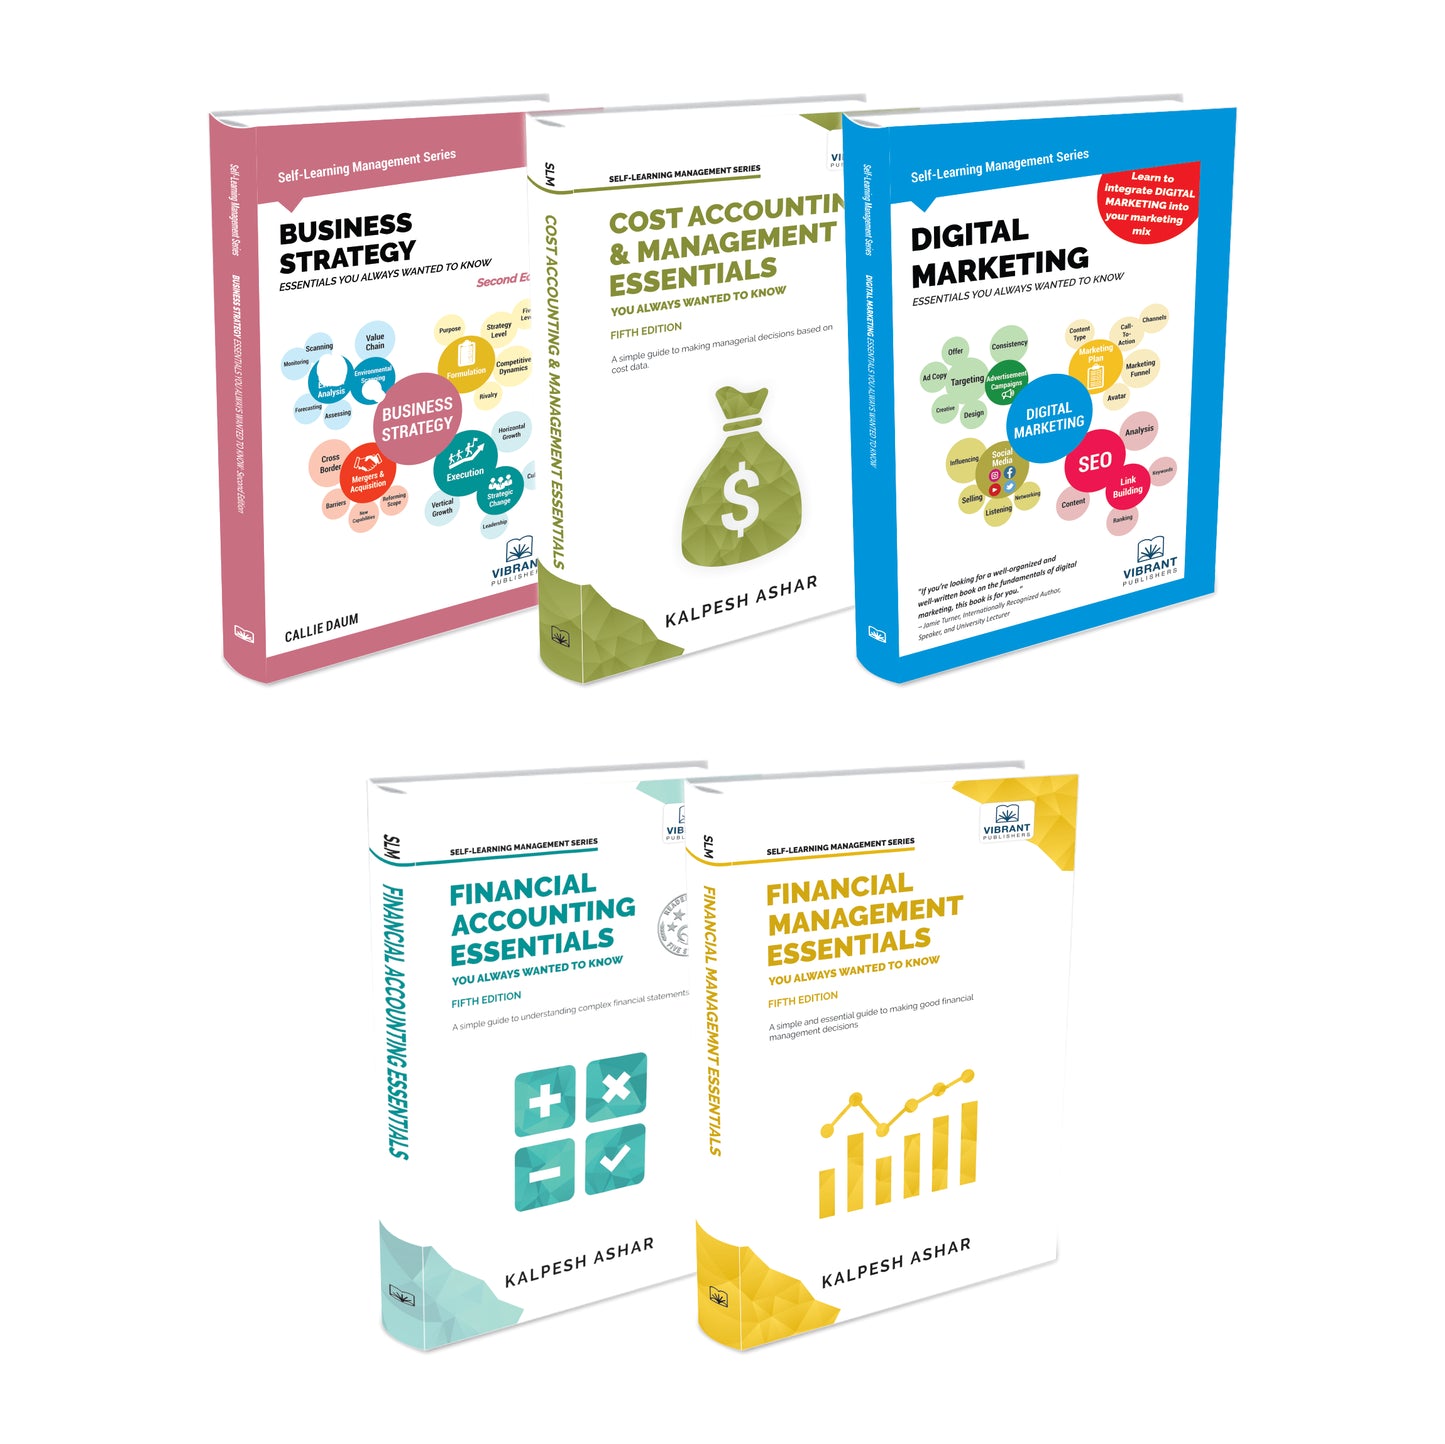 Self-Learning Management Essentials for Entrepreneurs and Professionals – Ideal for Business Startups, Consultants, Entry to Mid-Level Managers (Concise & Easy to Understand Guides with Case Studies)